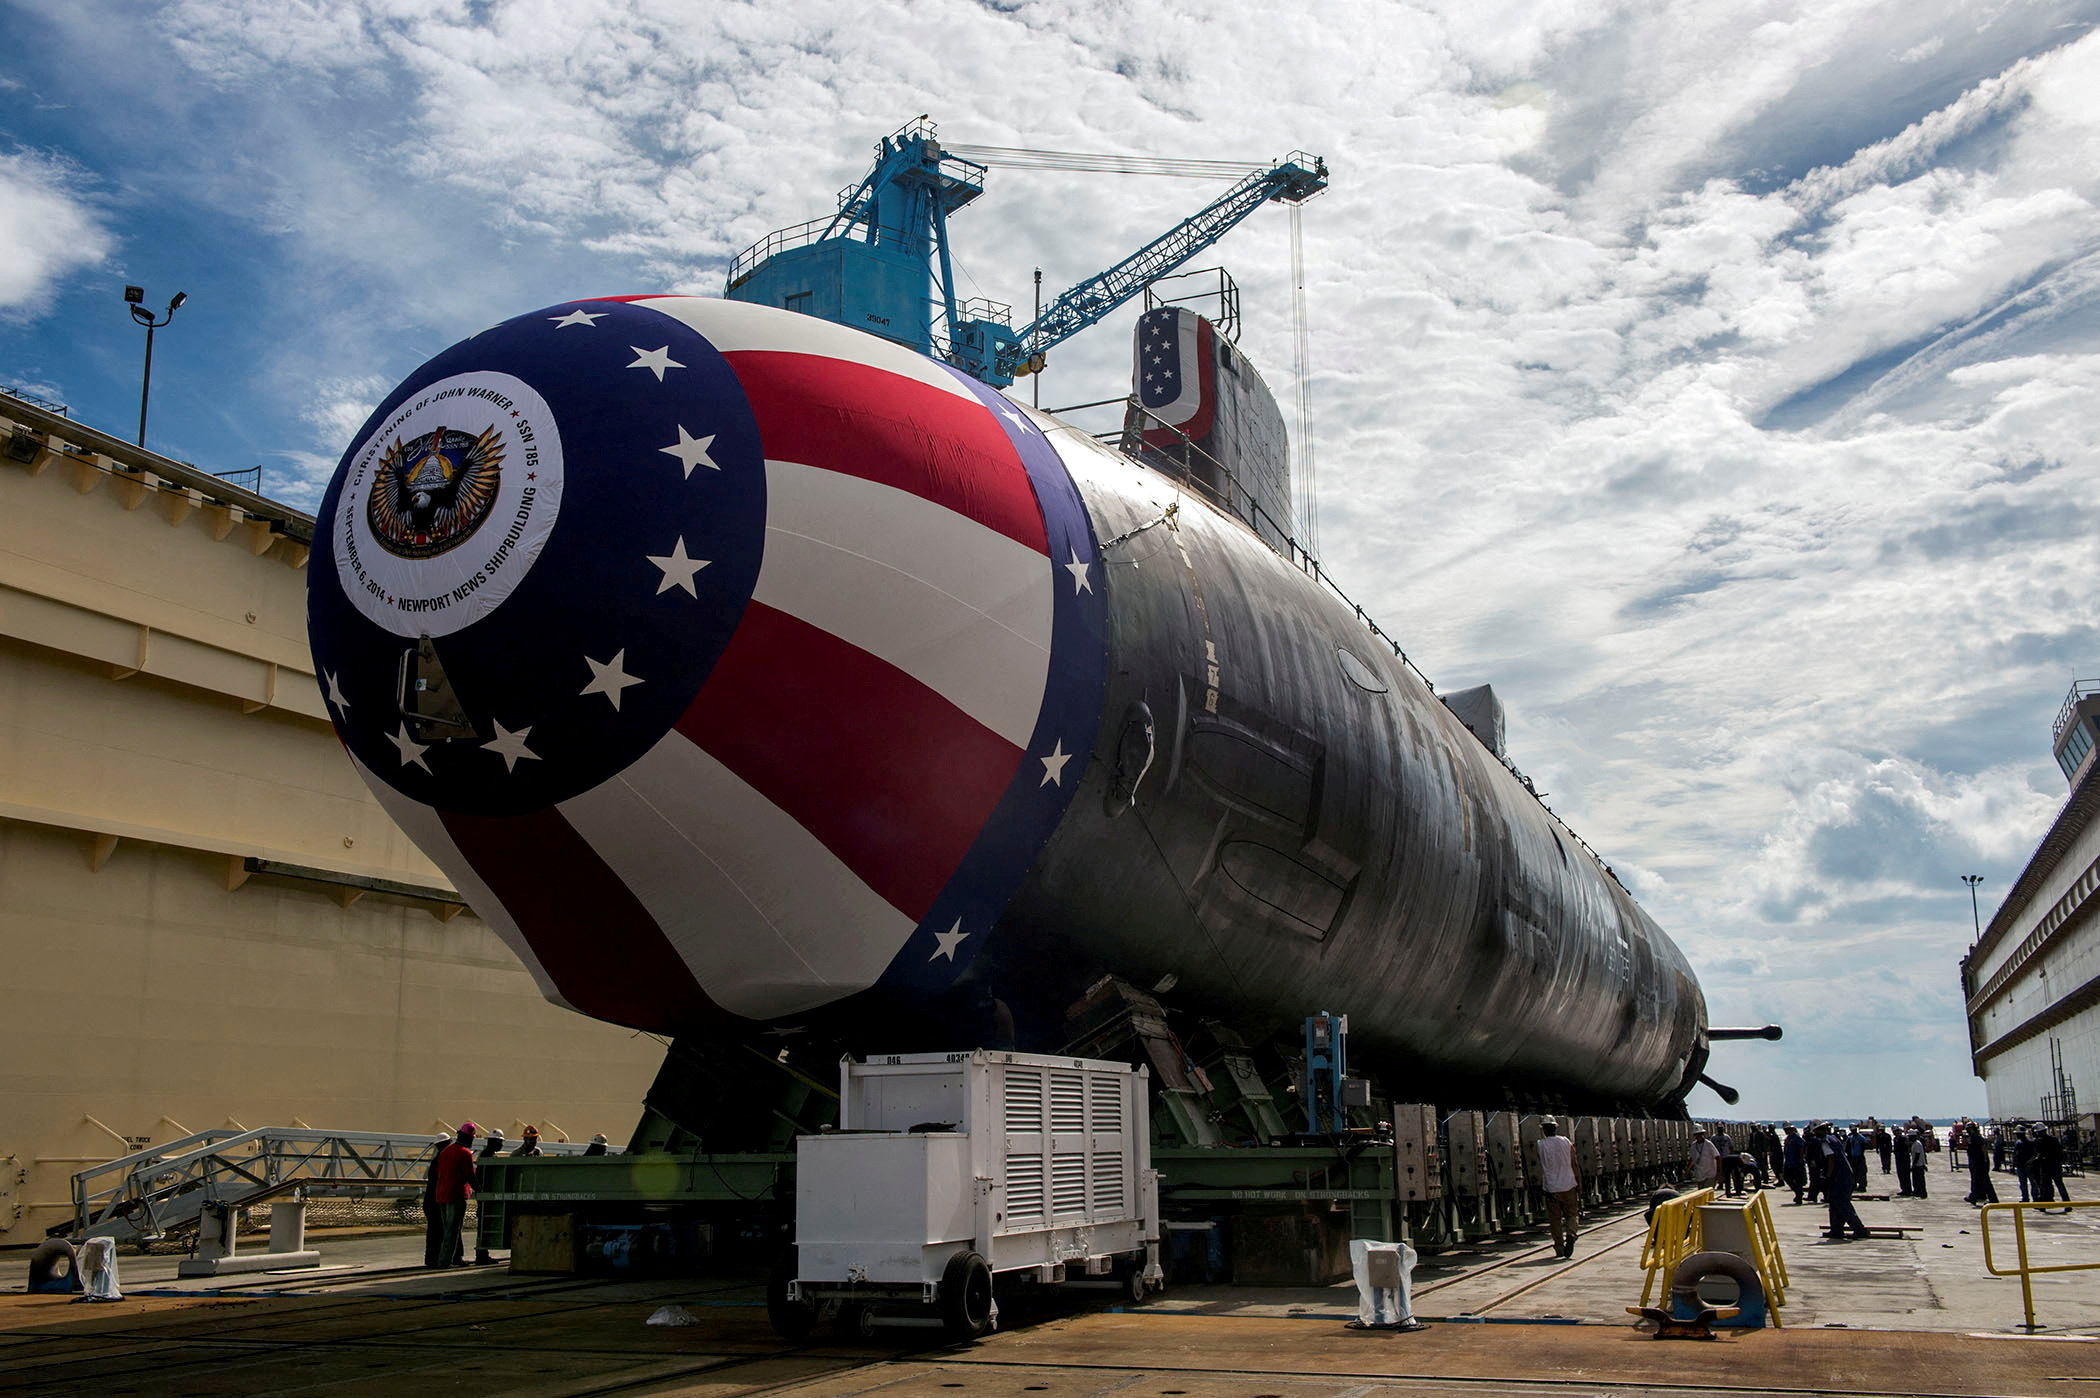 The Virginia-class attack submarine Pre-commissioning Unit John Warner is moved to Newport News Shipbuilding's floating dry dock